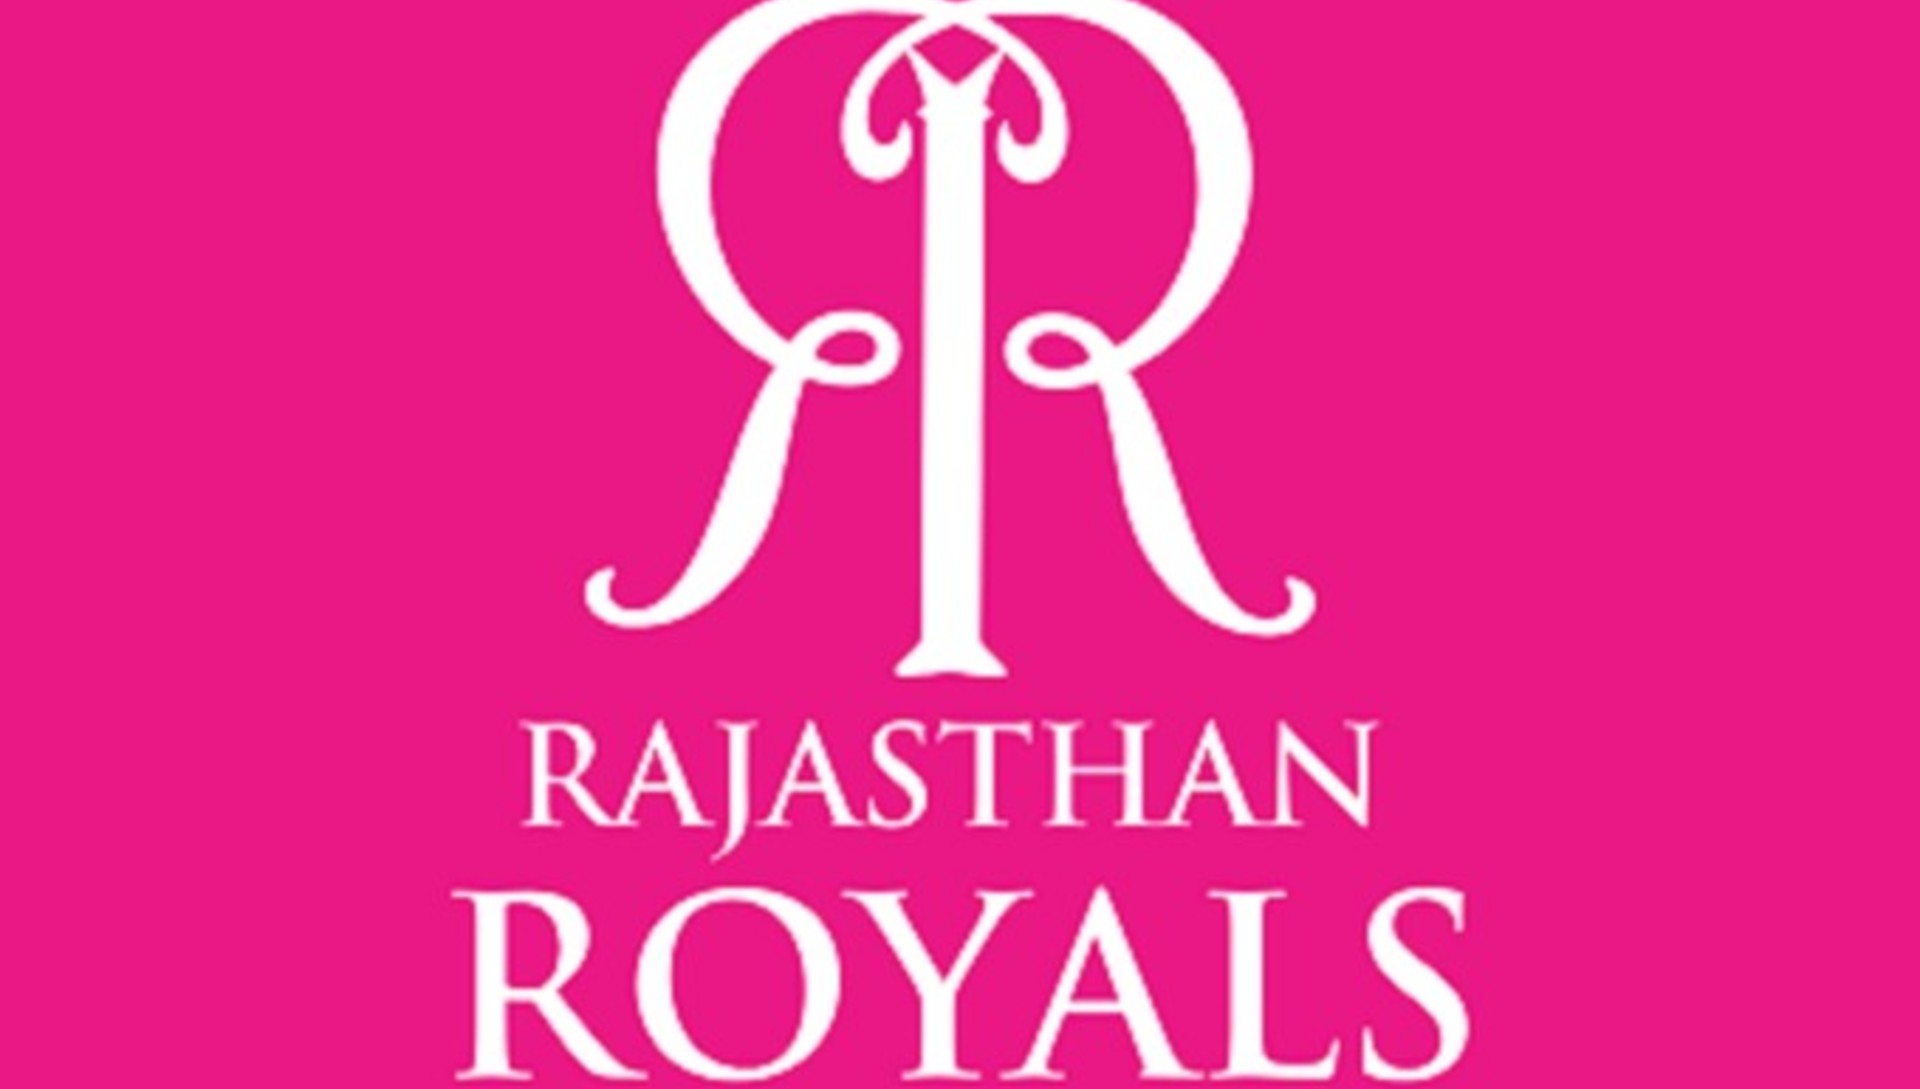 Rajasthan Royals are one of the most popular IPL franchises. (Image Credit: Twitter/@rajasthanroyals)